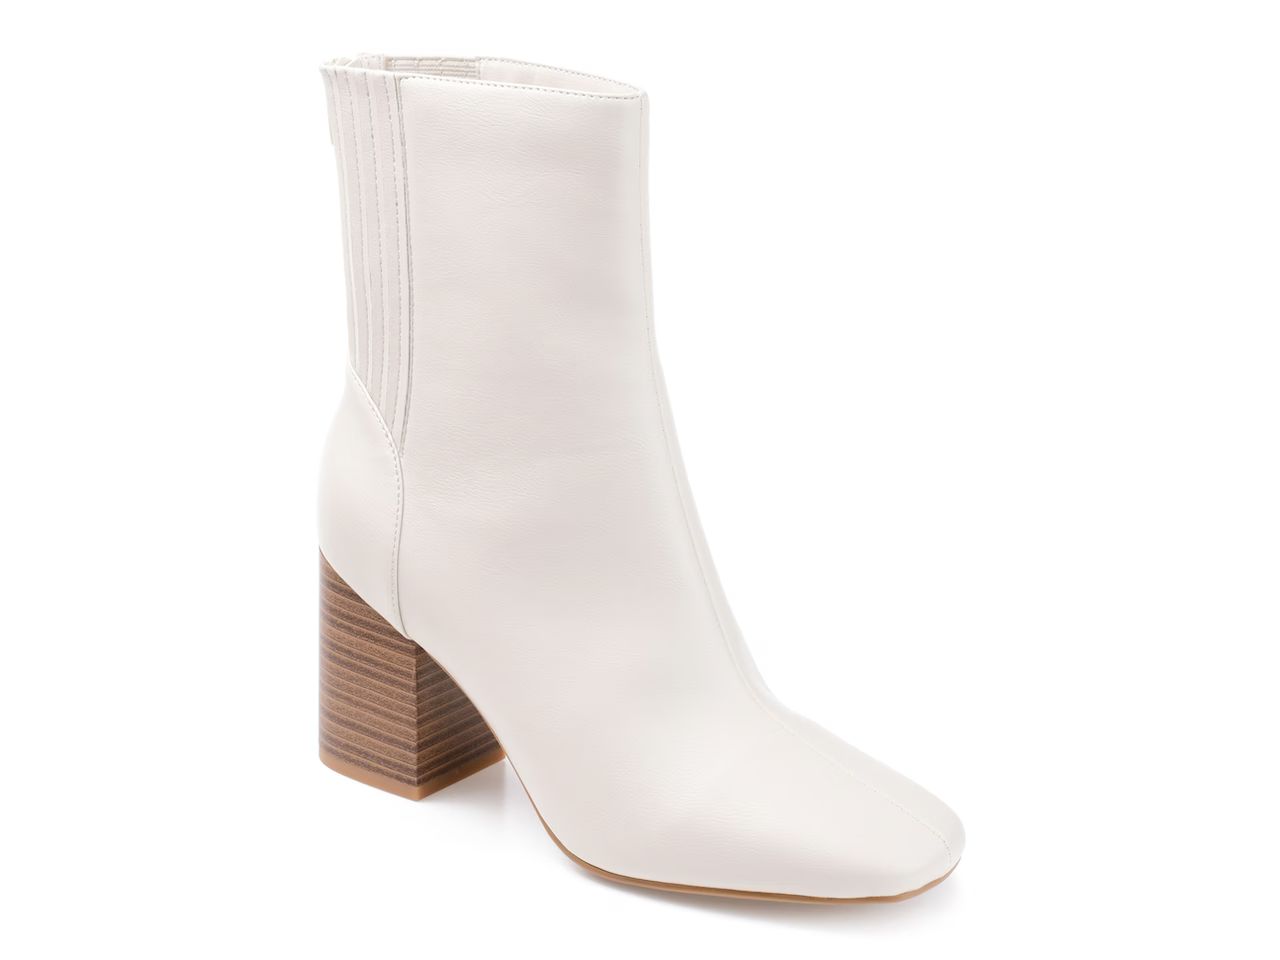 Journee Collection Maize Bootie | DSW